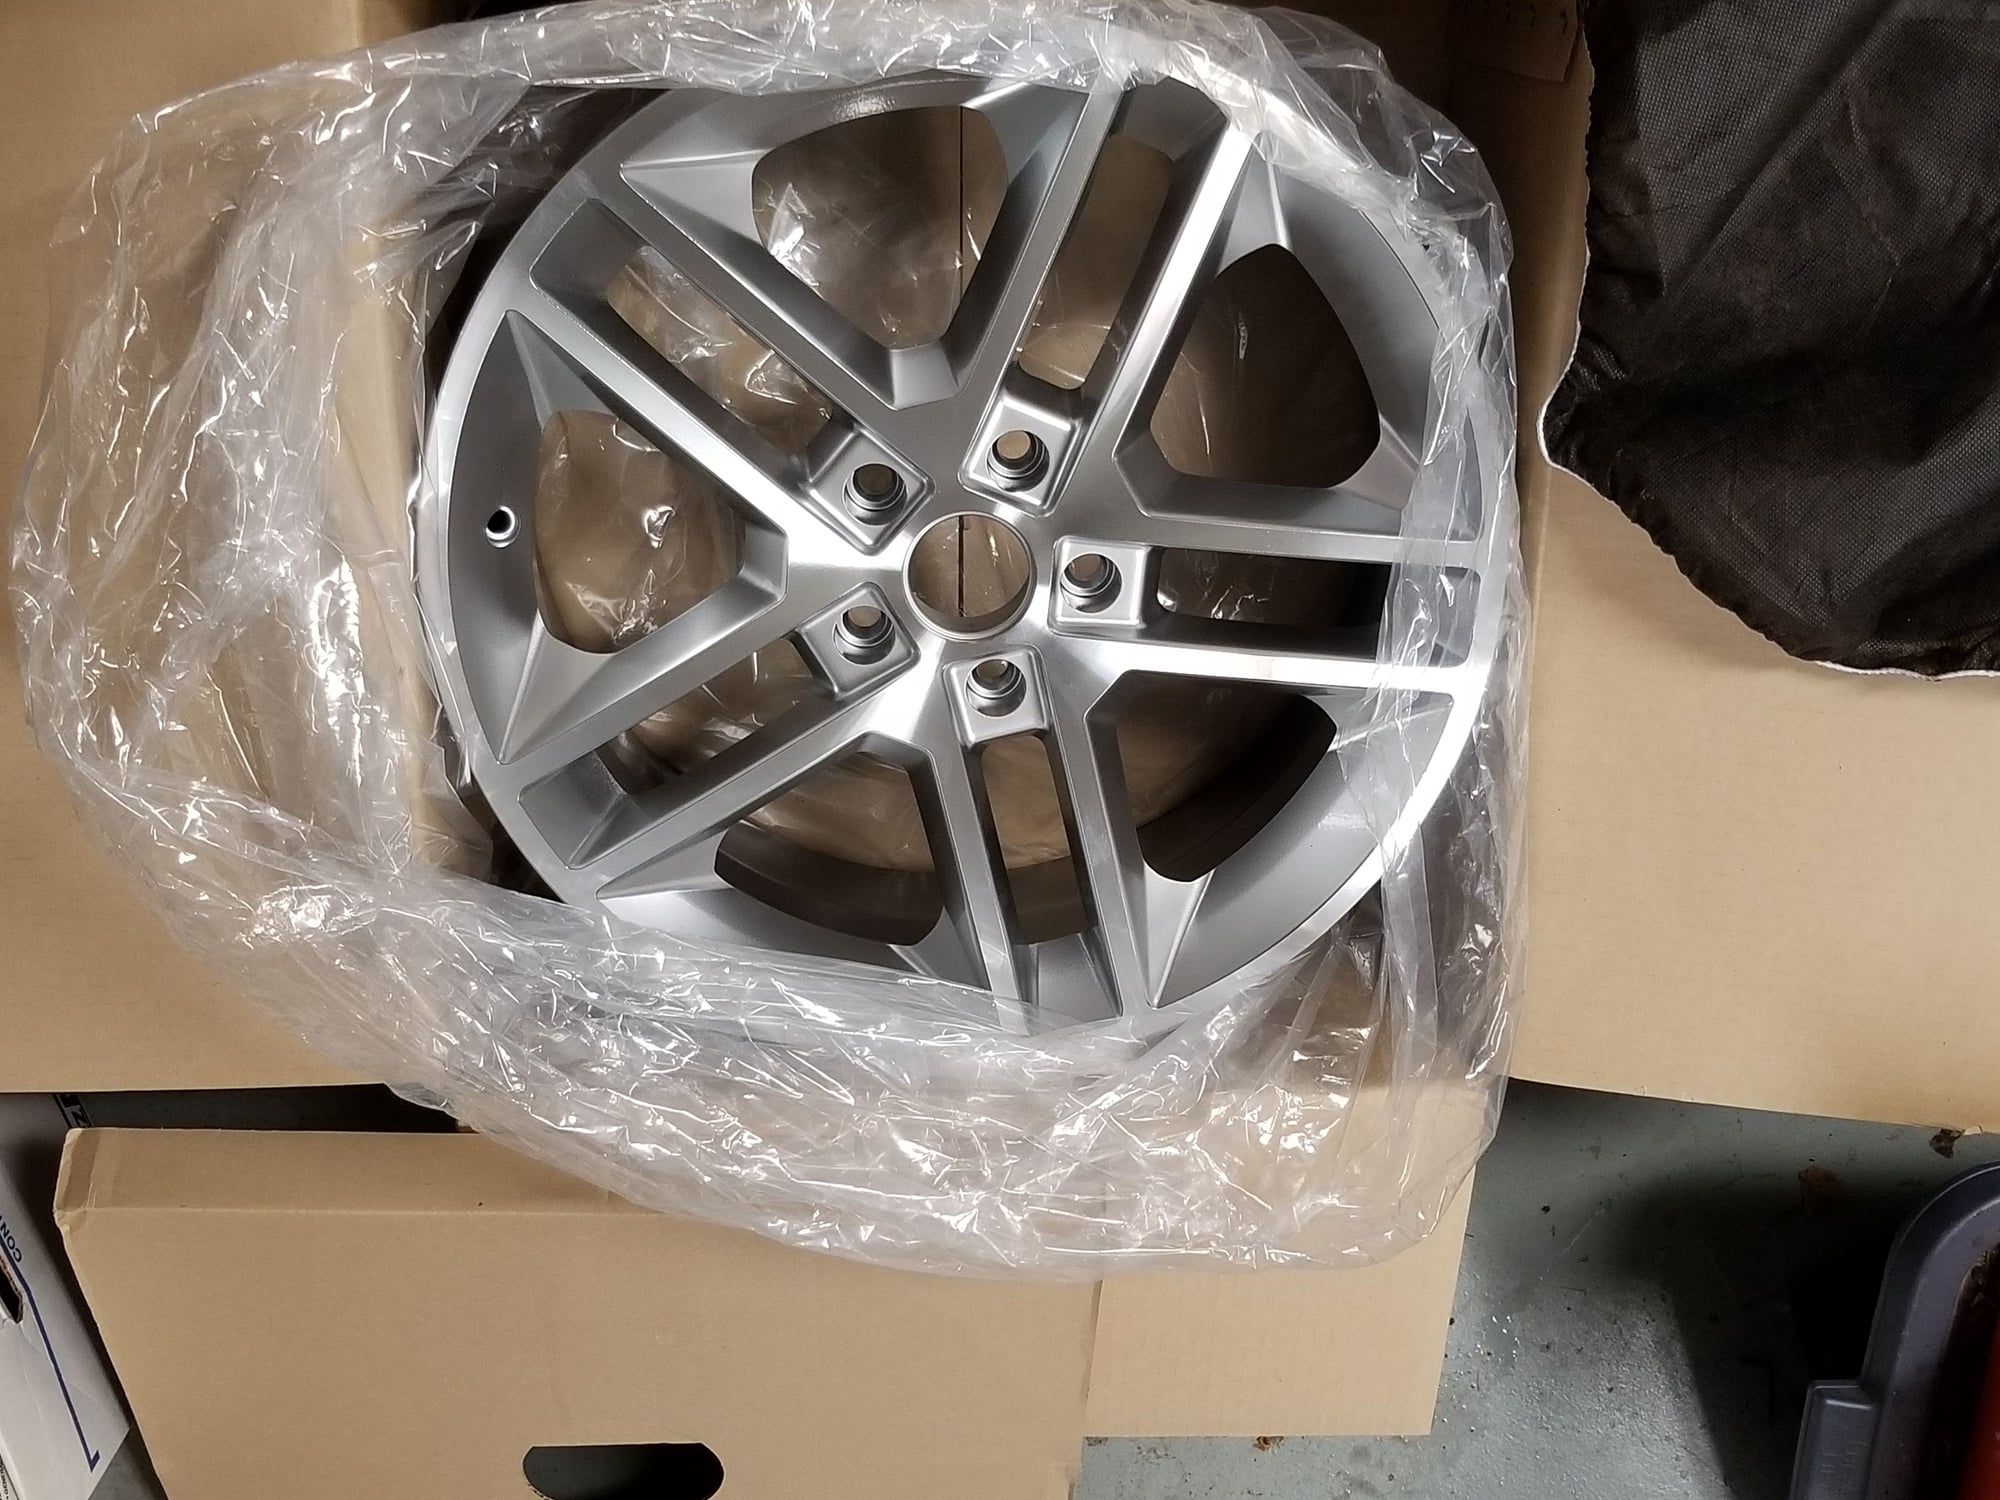 Wheels and Tires/Axles - SOLD: 5 18" Ronjon Inspyre wheels - Used - 2001 to 2003 Acura CL - 1999 to 2003 Acura TL - West Orange, NJ 07052, United States